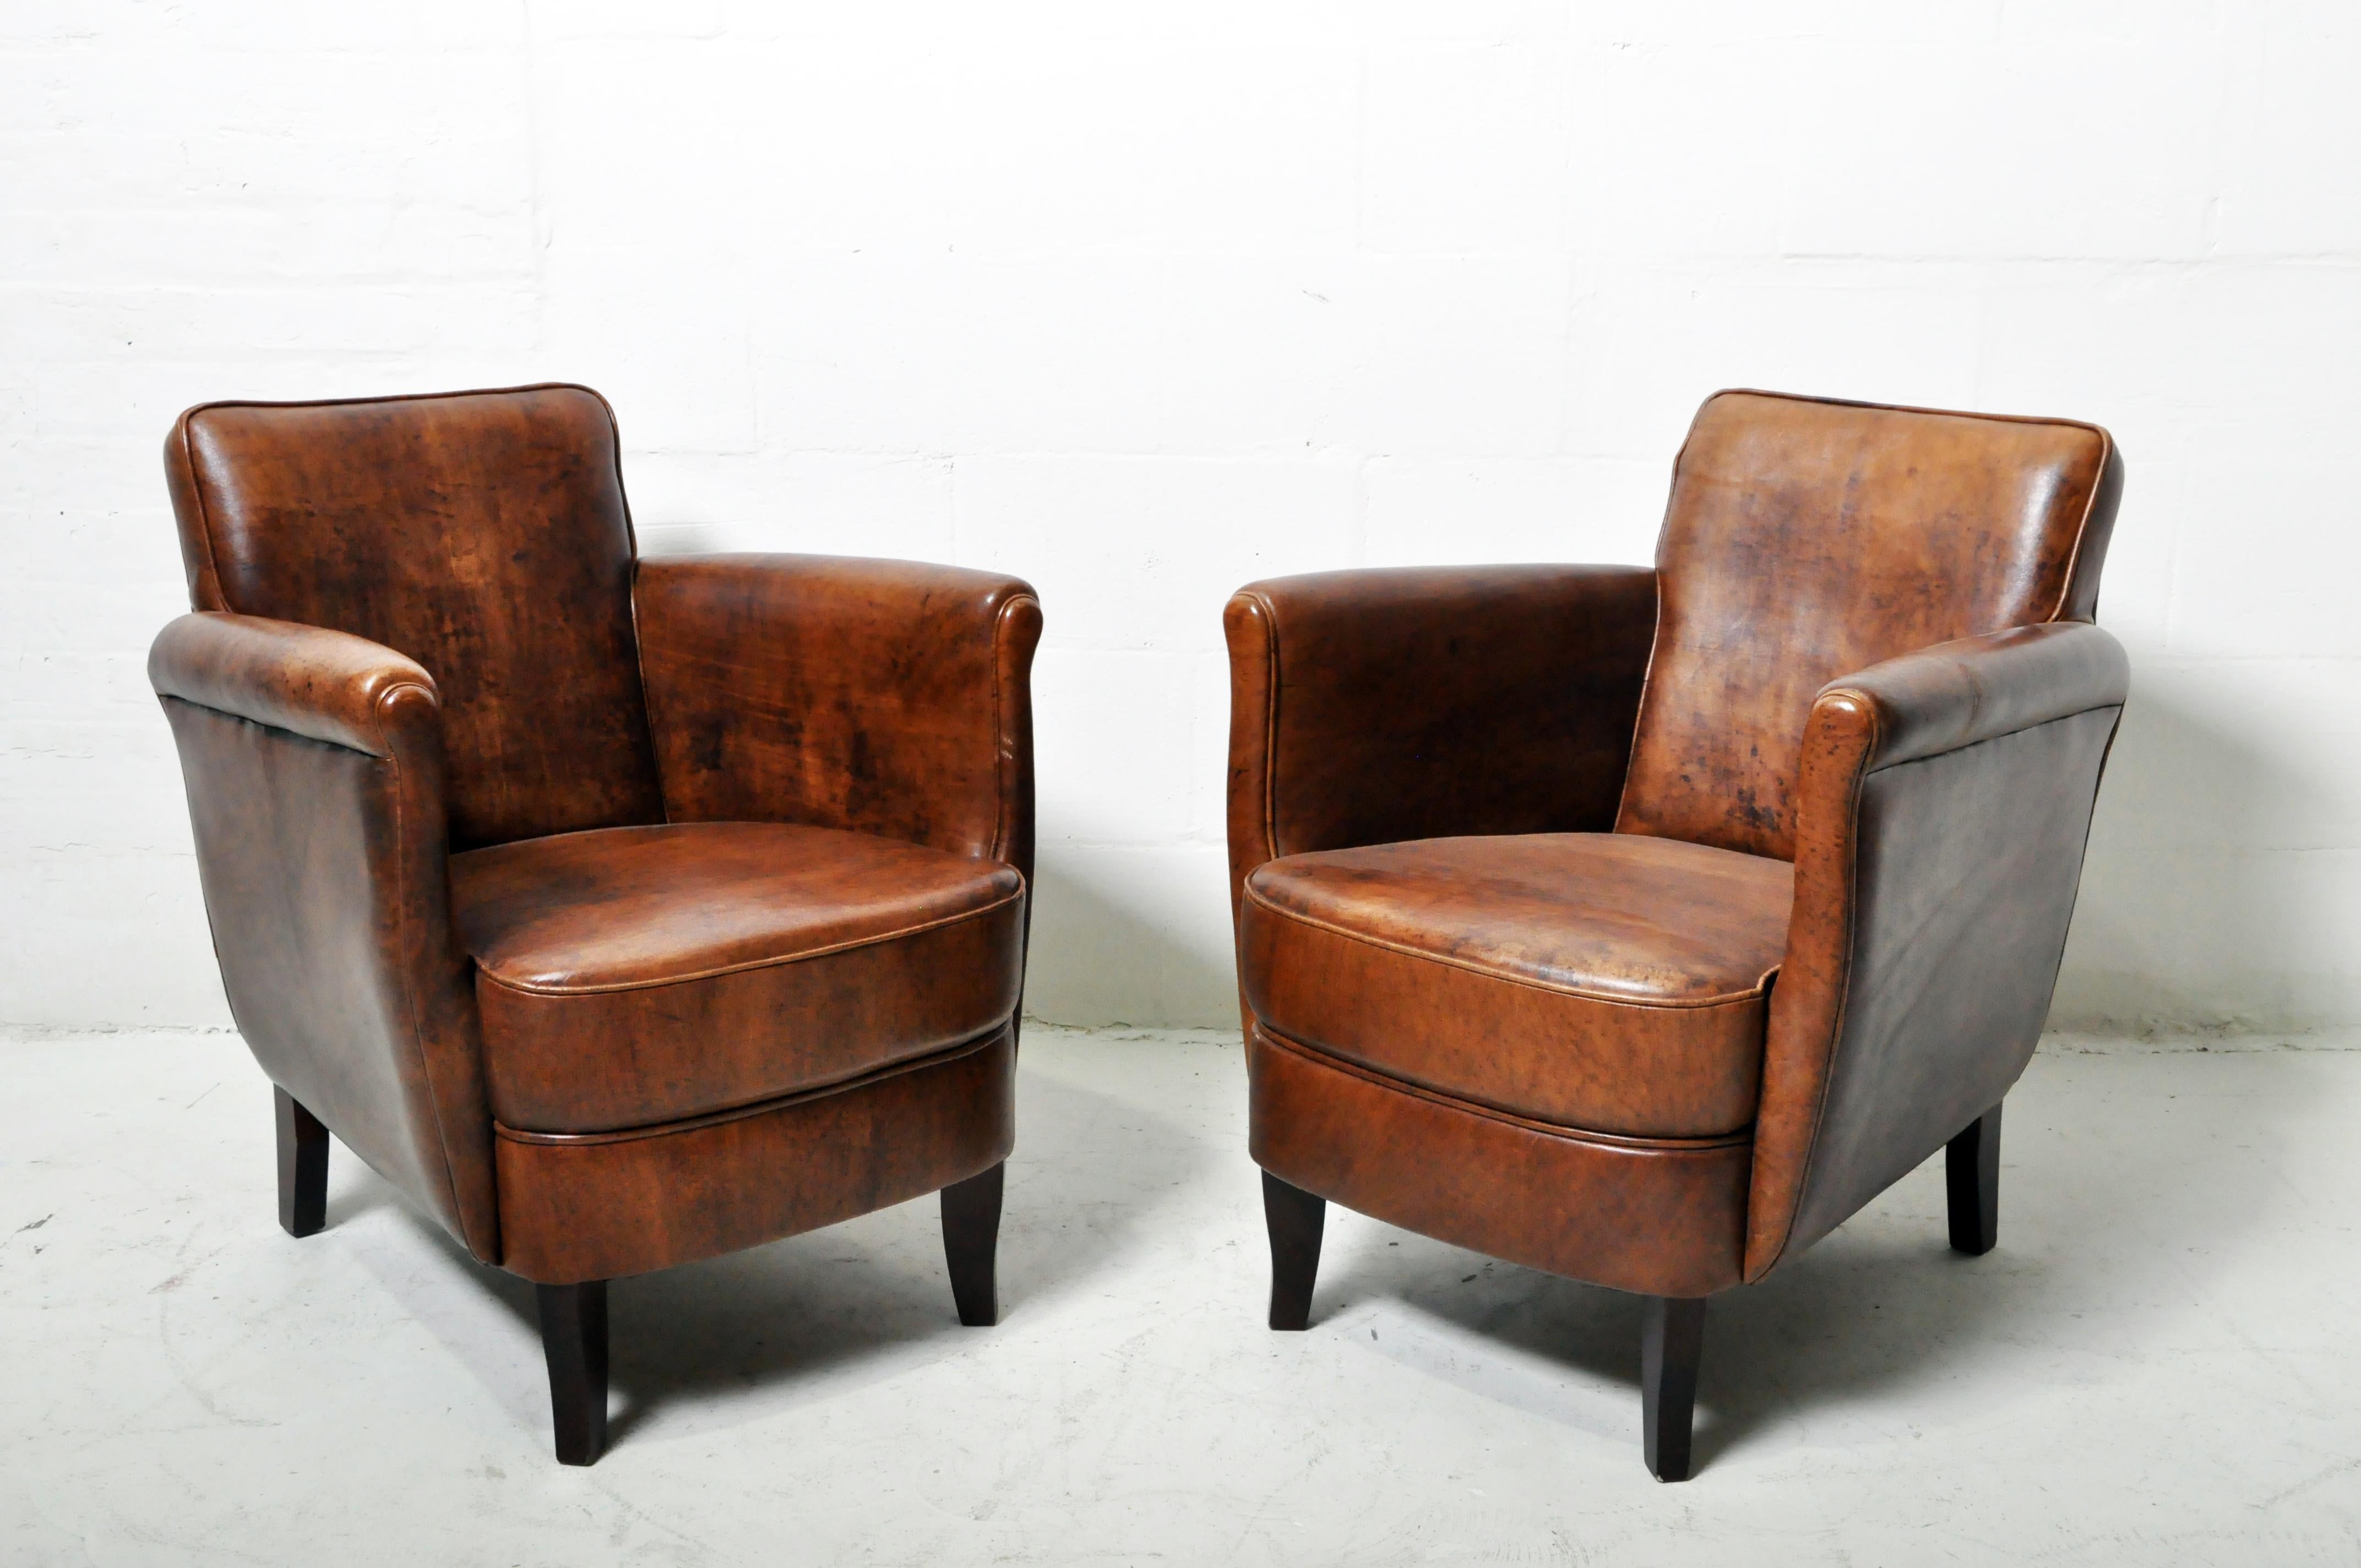 These compact leather chairs feature bold, sheep leather, thick padded seats and slim, roll panel arms.